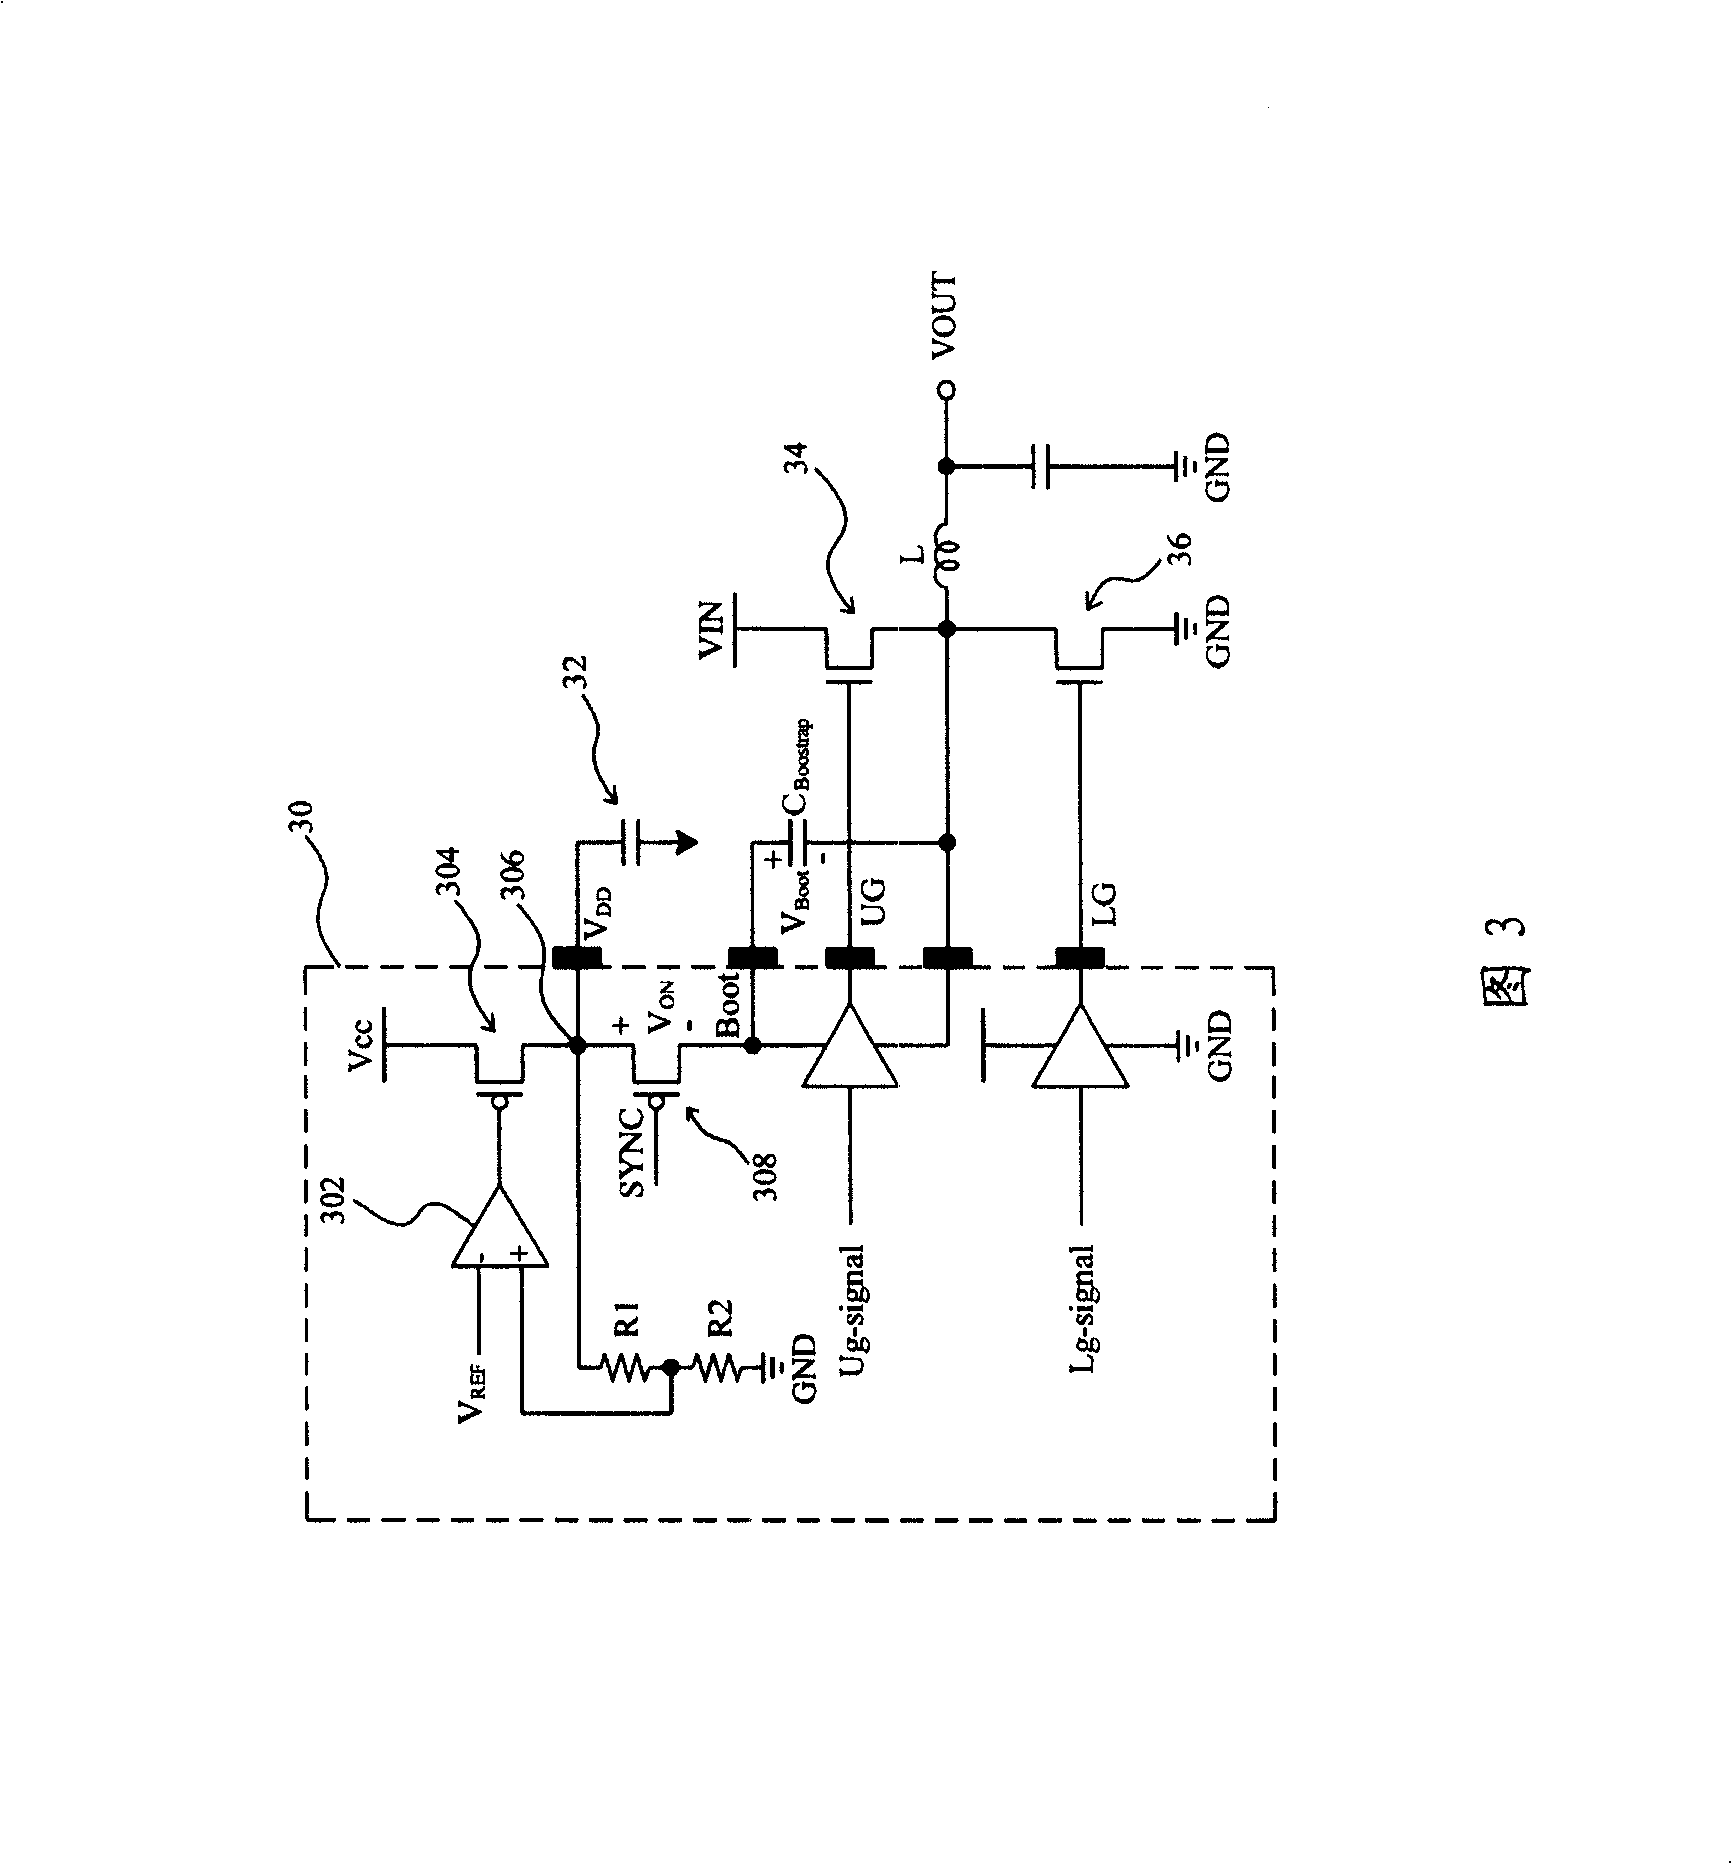 Circuit for charging bootstrap capacitor of voltage converter